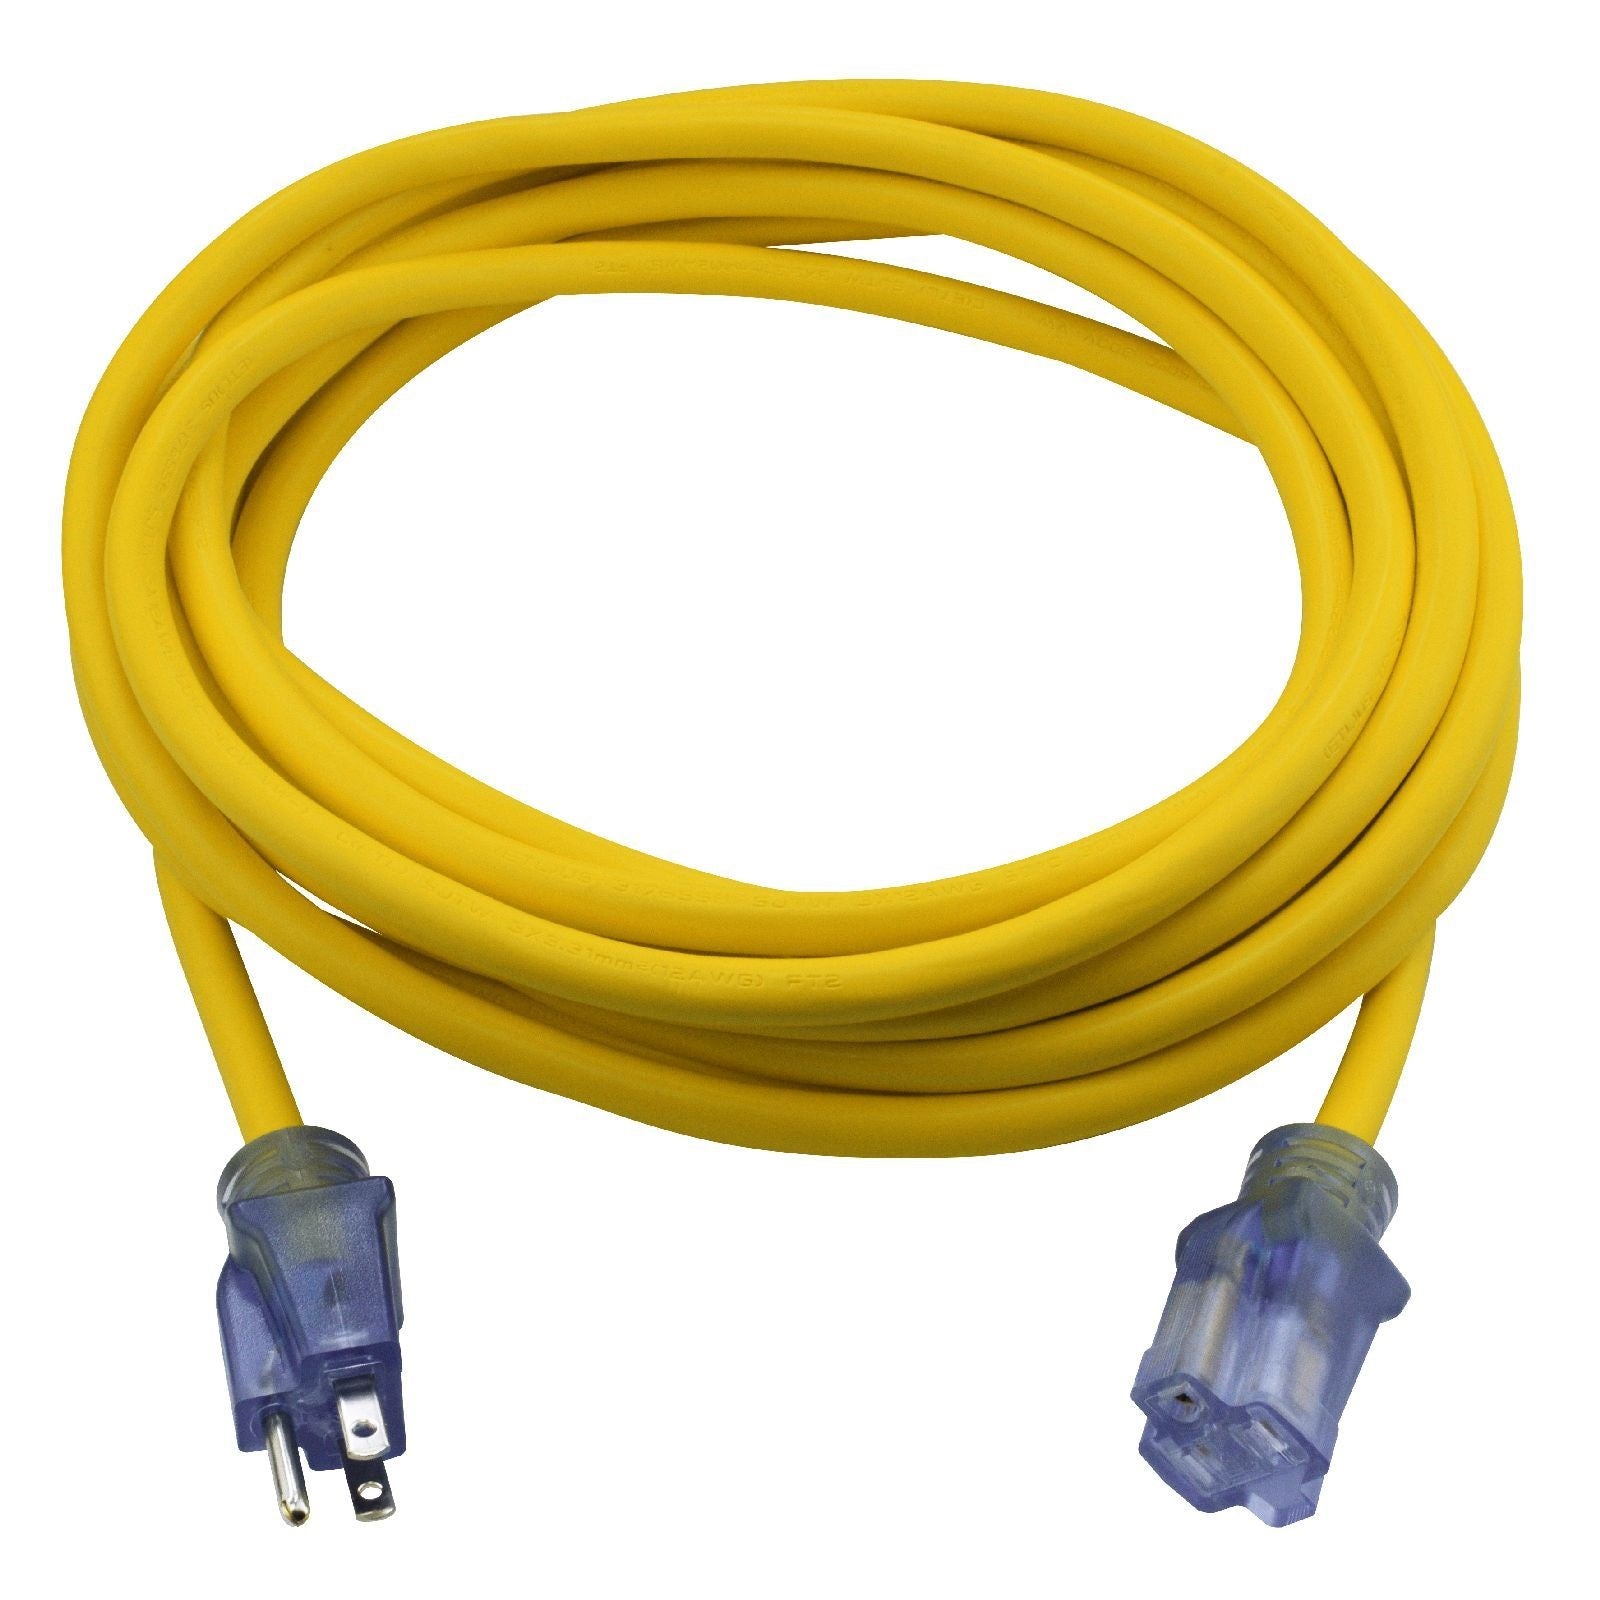 14/3 Contractor Extension Cord, LT511725